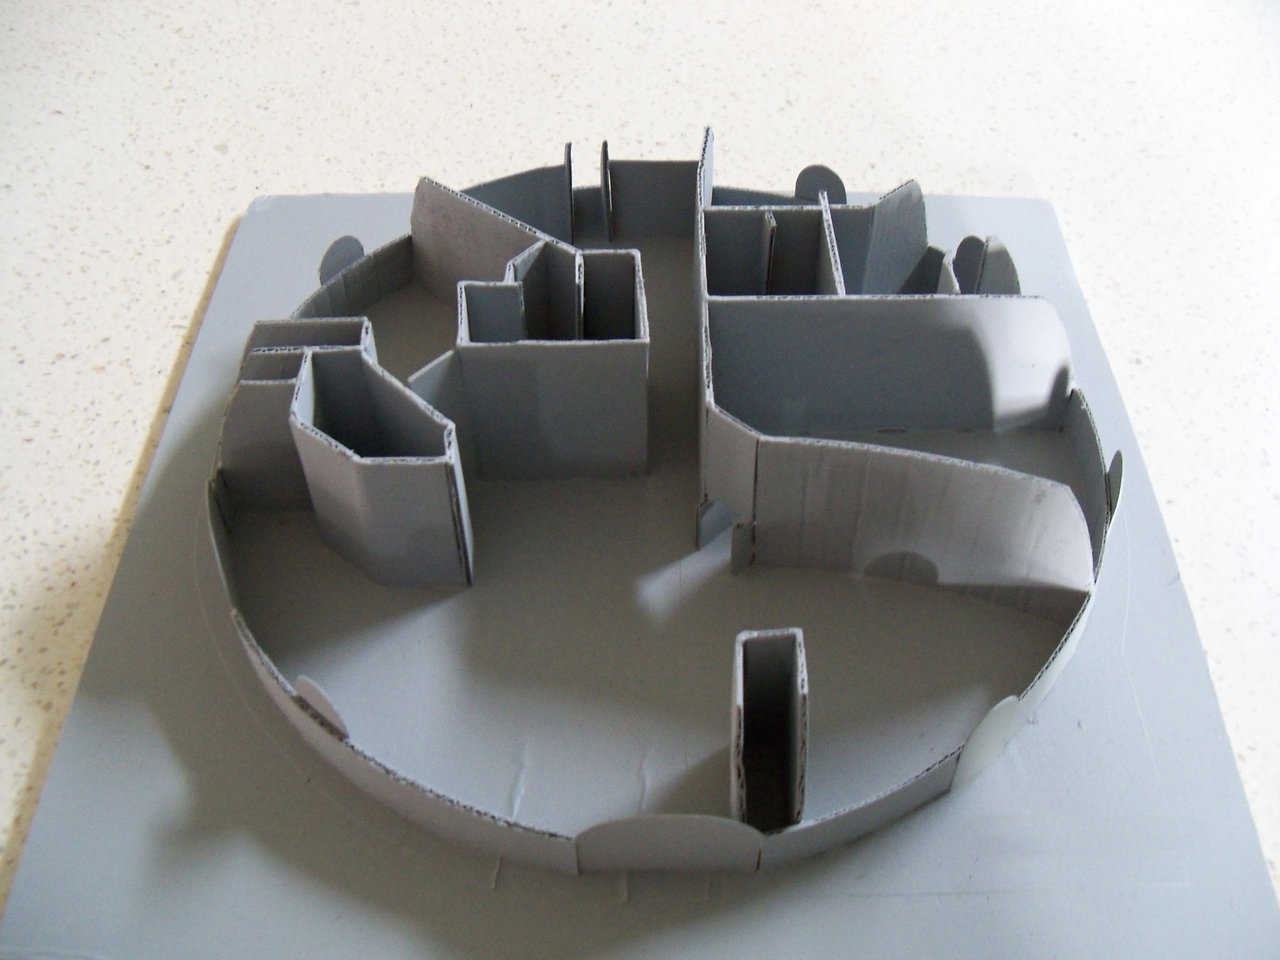 3-D Model — After brainstorming their floorplan, the Ecker’s built this cardboard 3-D model to study how light and room area might appear in their finished Monolithic dome.